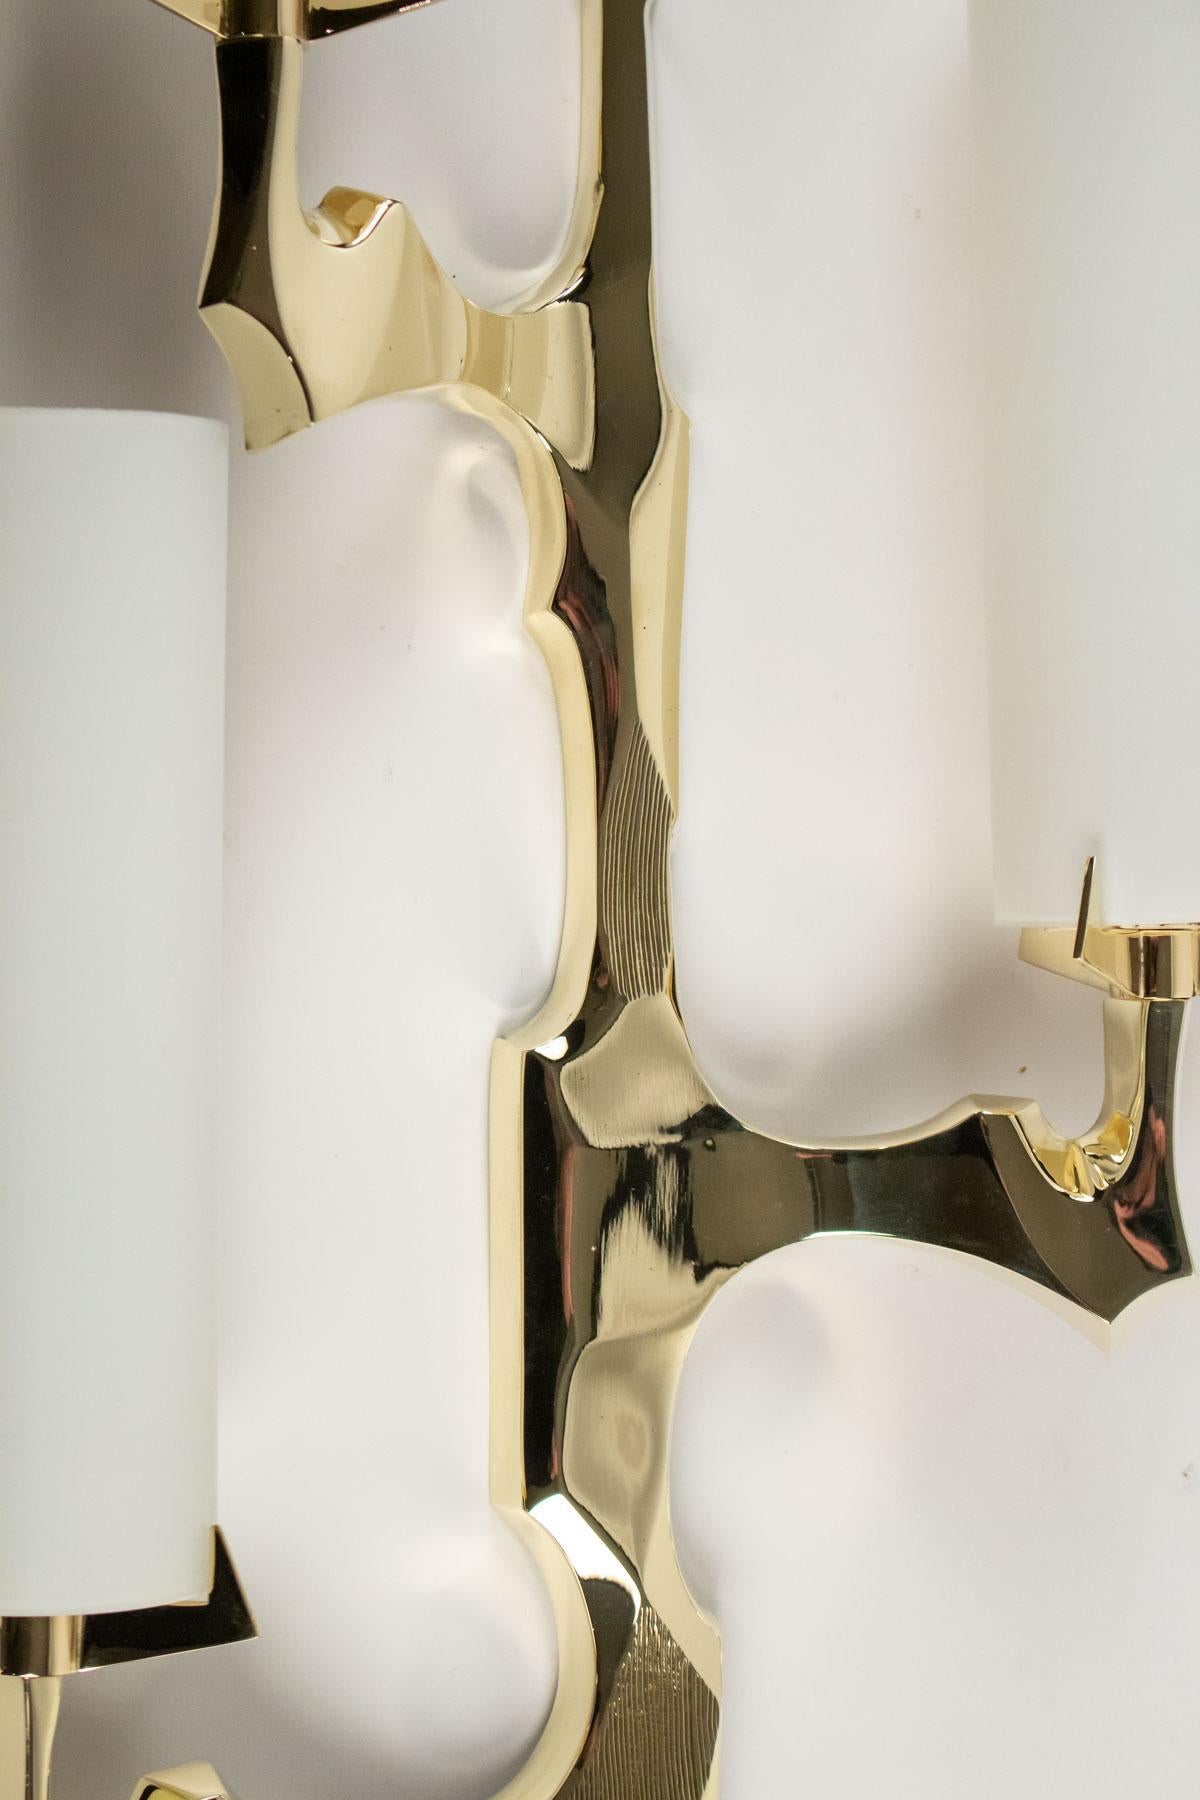 1950s Pair of Arlus Bronze Sconces
The sconces are made of gilded bronze and feature three bulbs with cylindrical opalin glass shades. 
The pair is composed with to symmetrical sconces.
Manufactured by Arlus, 1950s, France.